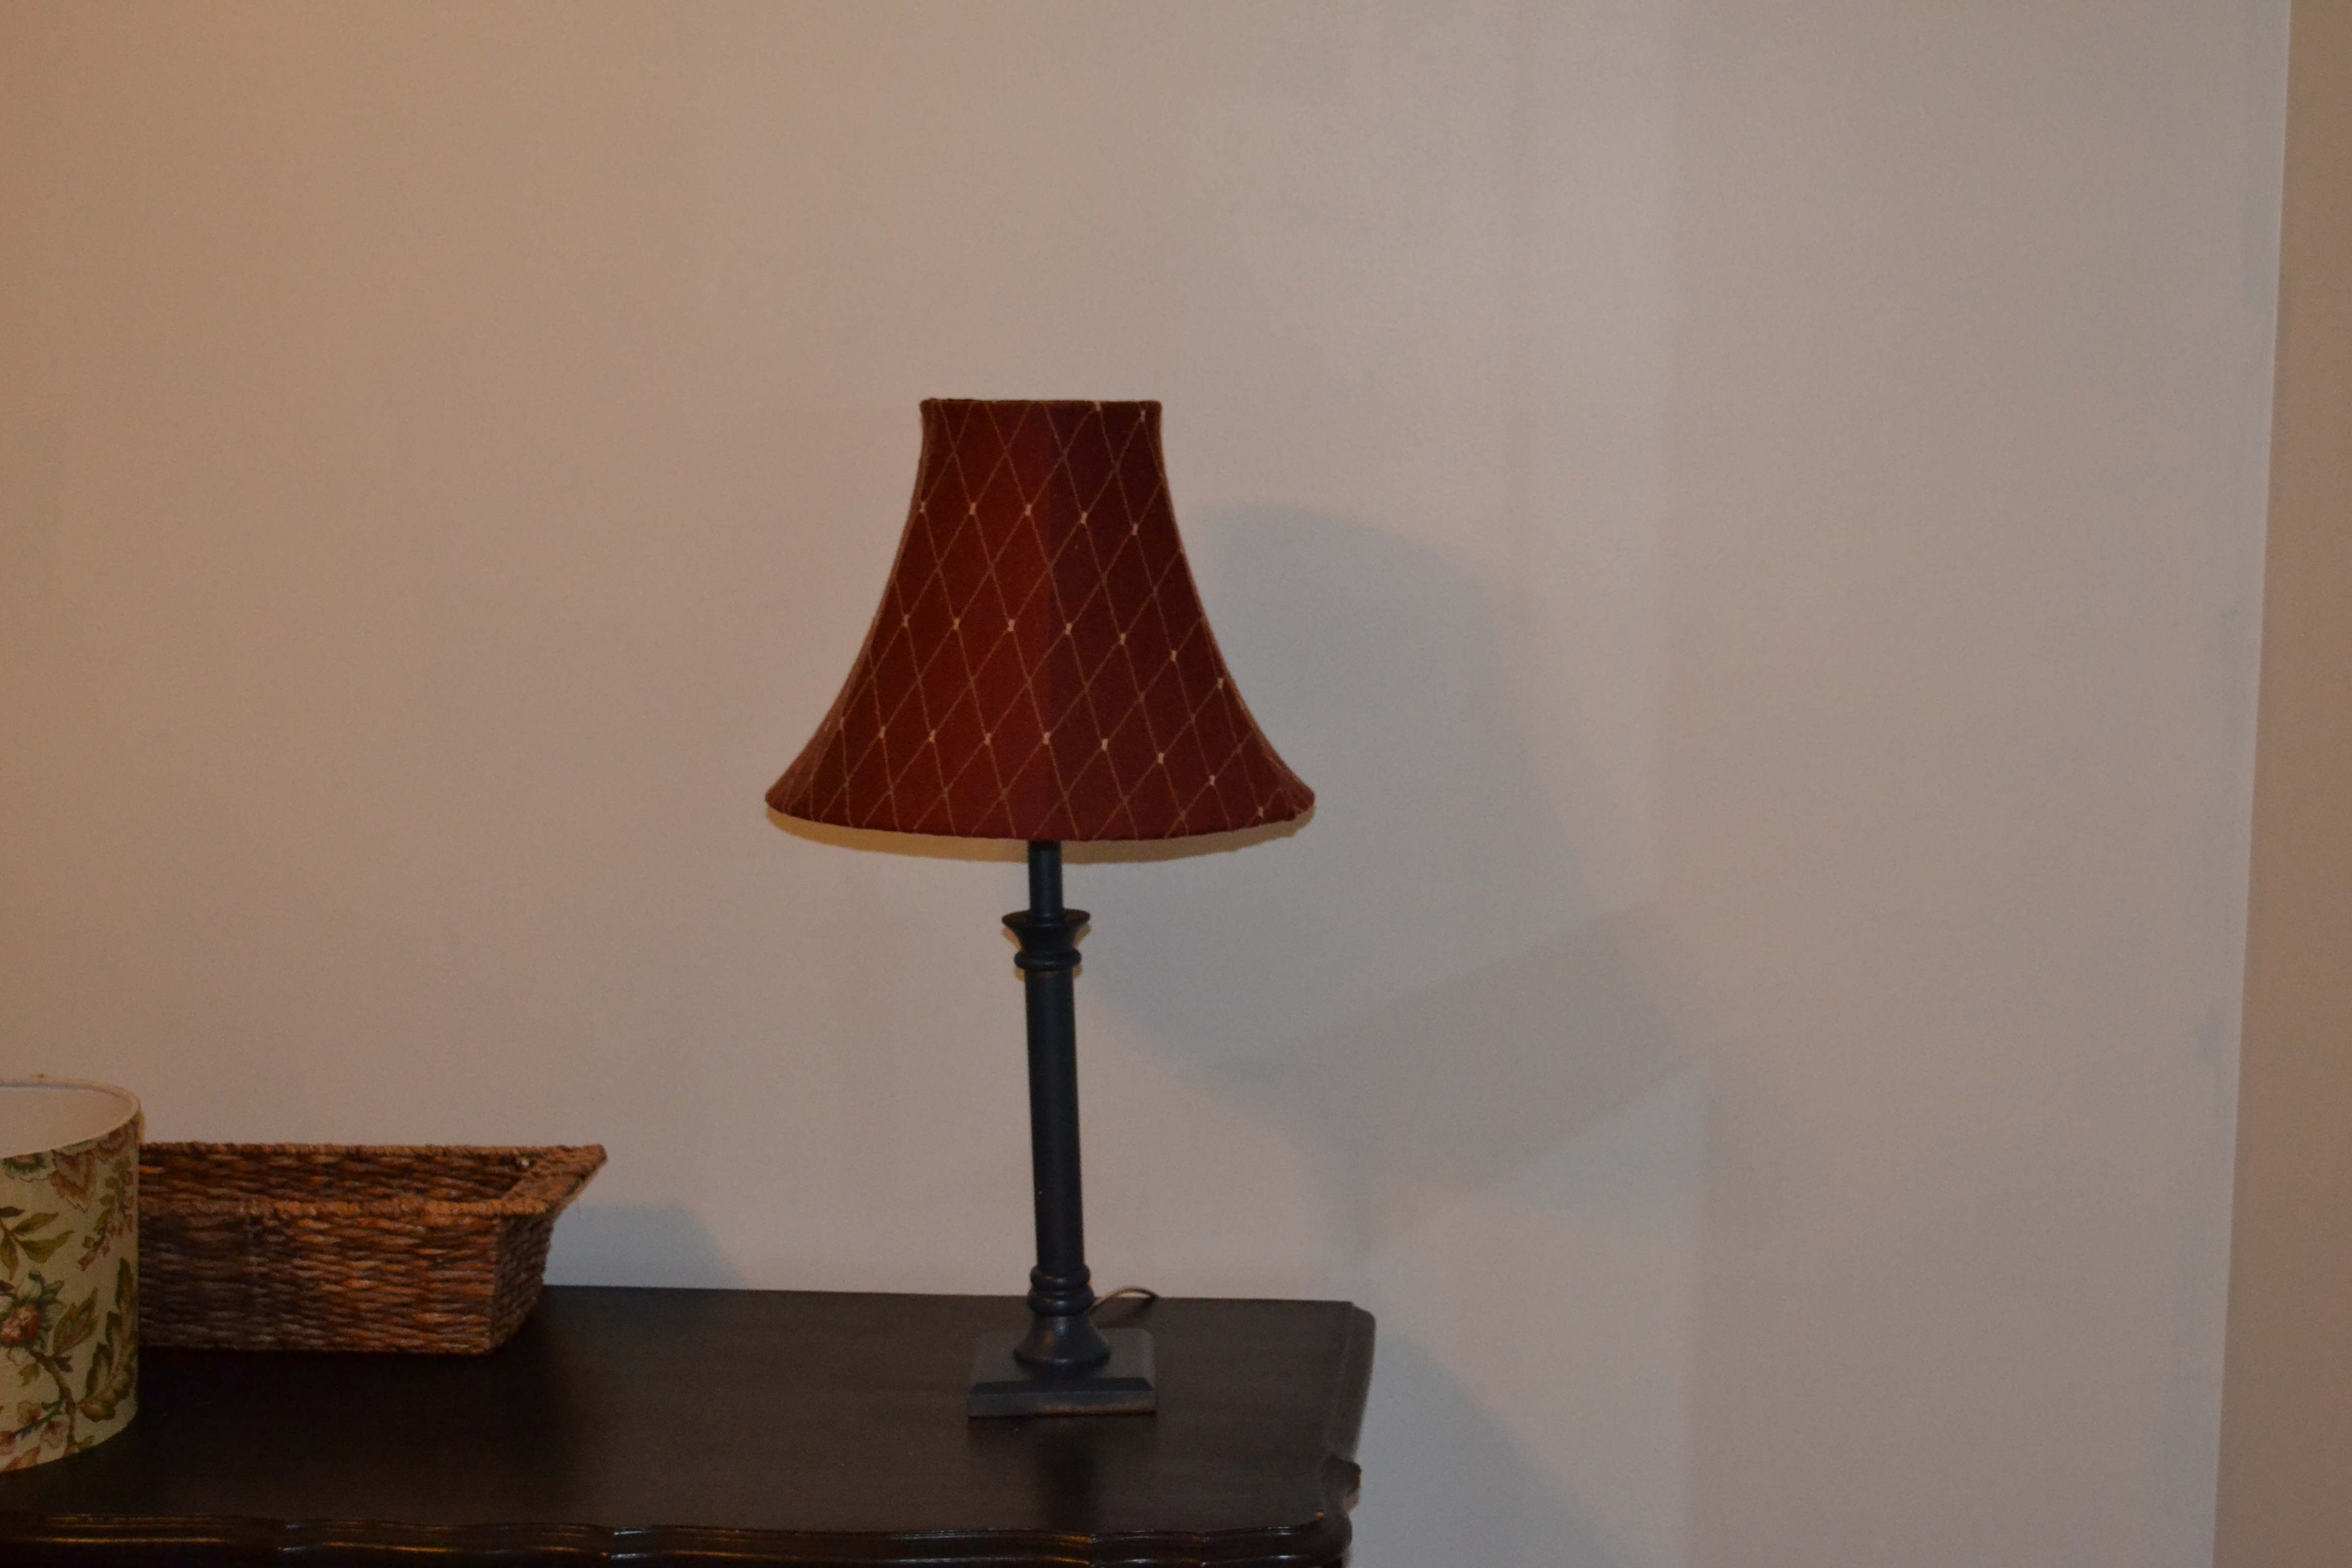 Product review: Hobby Lobby self-adhesive lamp shades | Life's One Extra